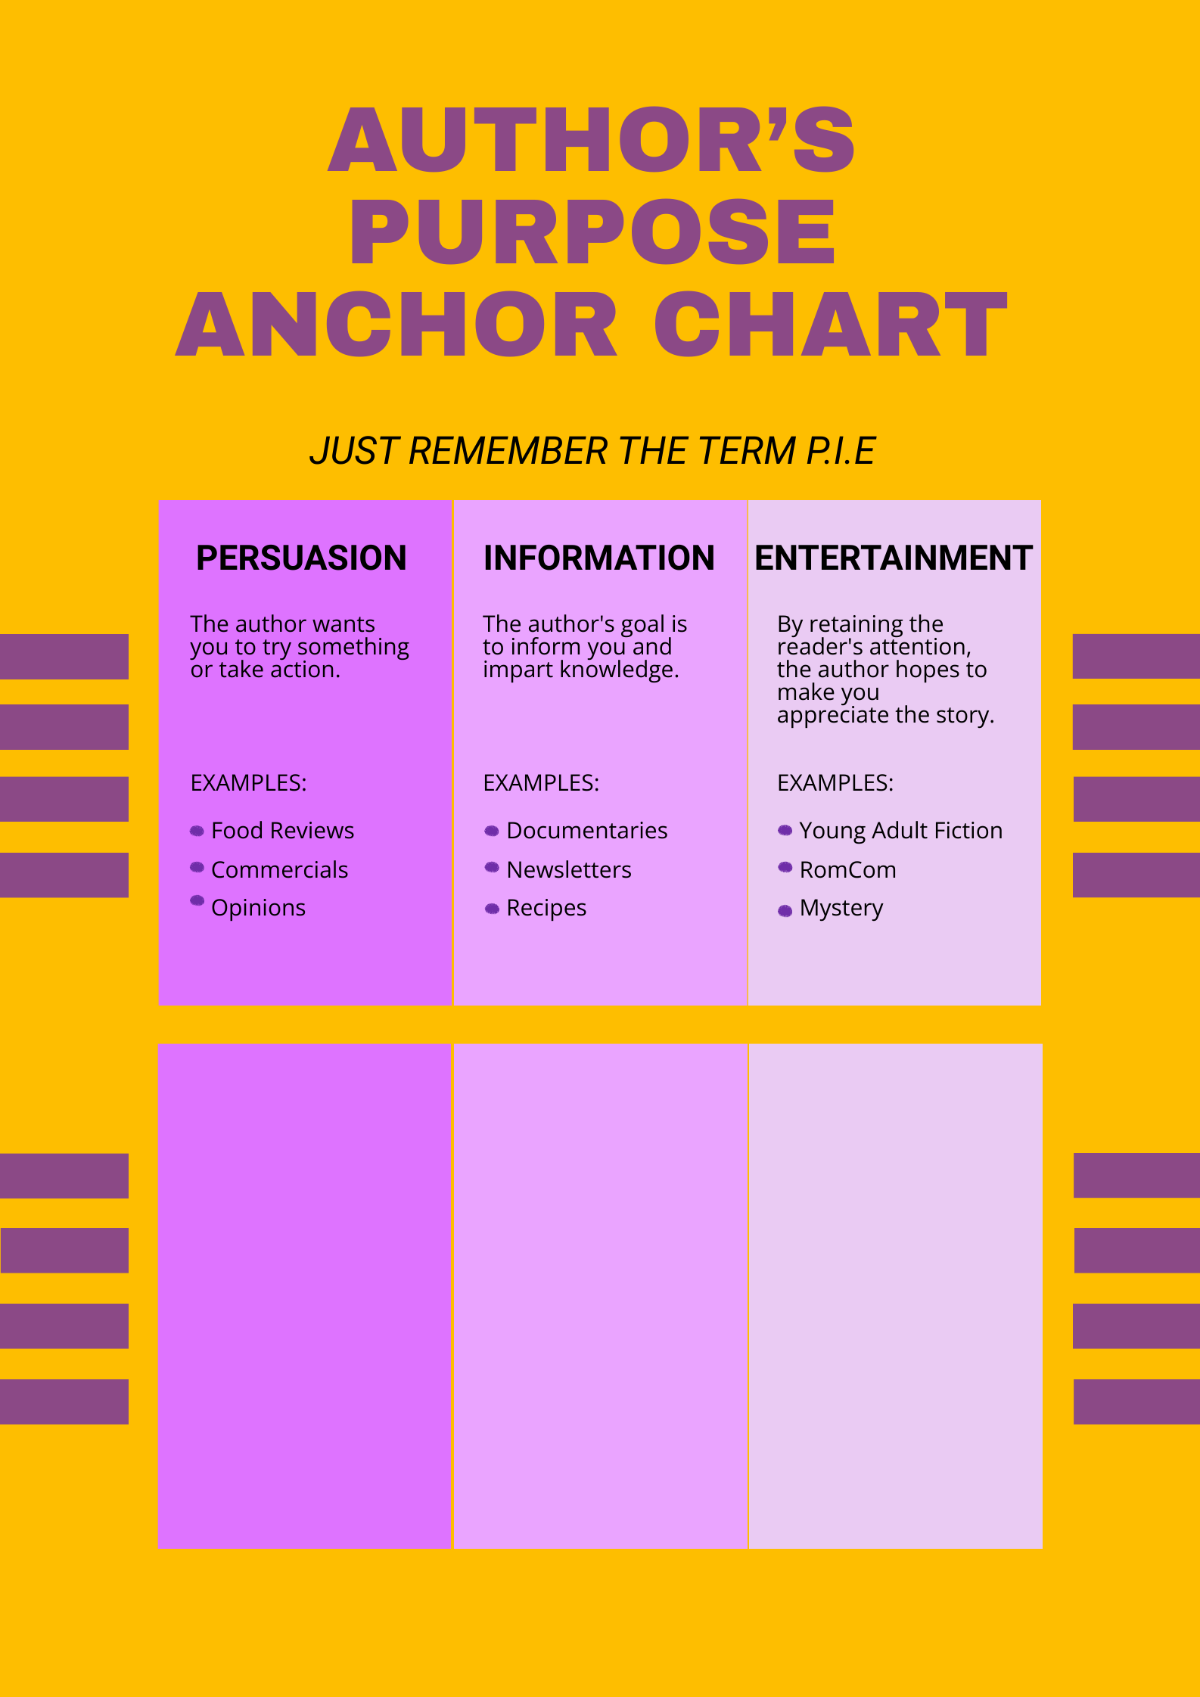 Author's Purpose anchor chart